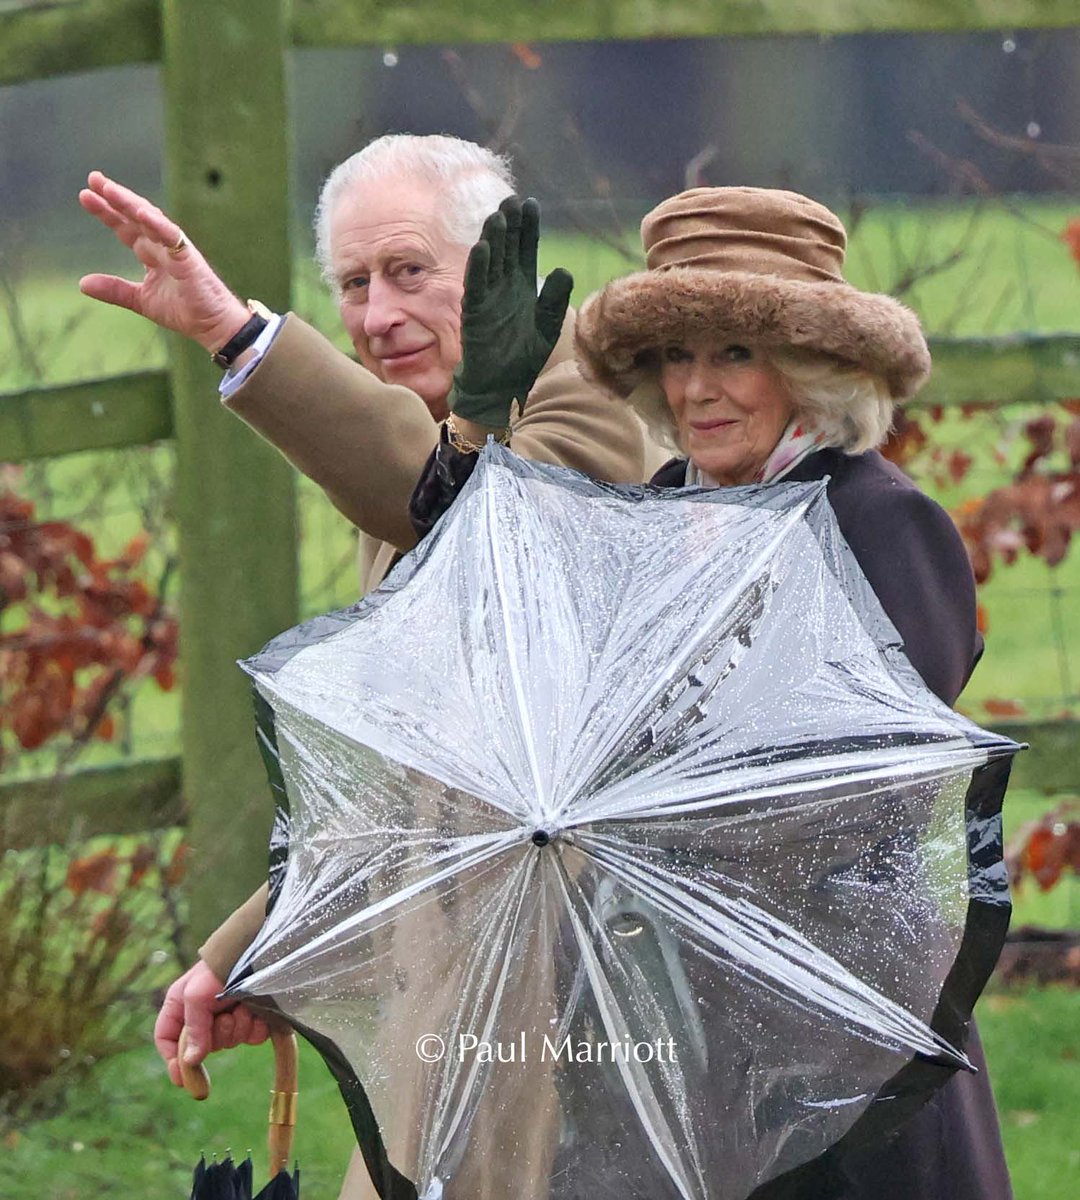 King Charles III and Queen Camilla are all smiles in Sandringham #kingcharlesiii #kingcharles #monarch #royalfamily #royalty #queencamilla #camilla #theking #canonr5 #canonuk #canoncameras #cancer #thebppa #newsphotography #picoftheday #potd